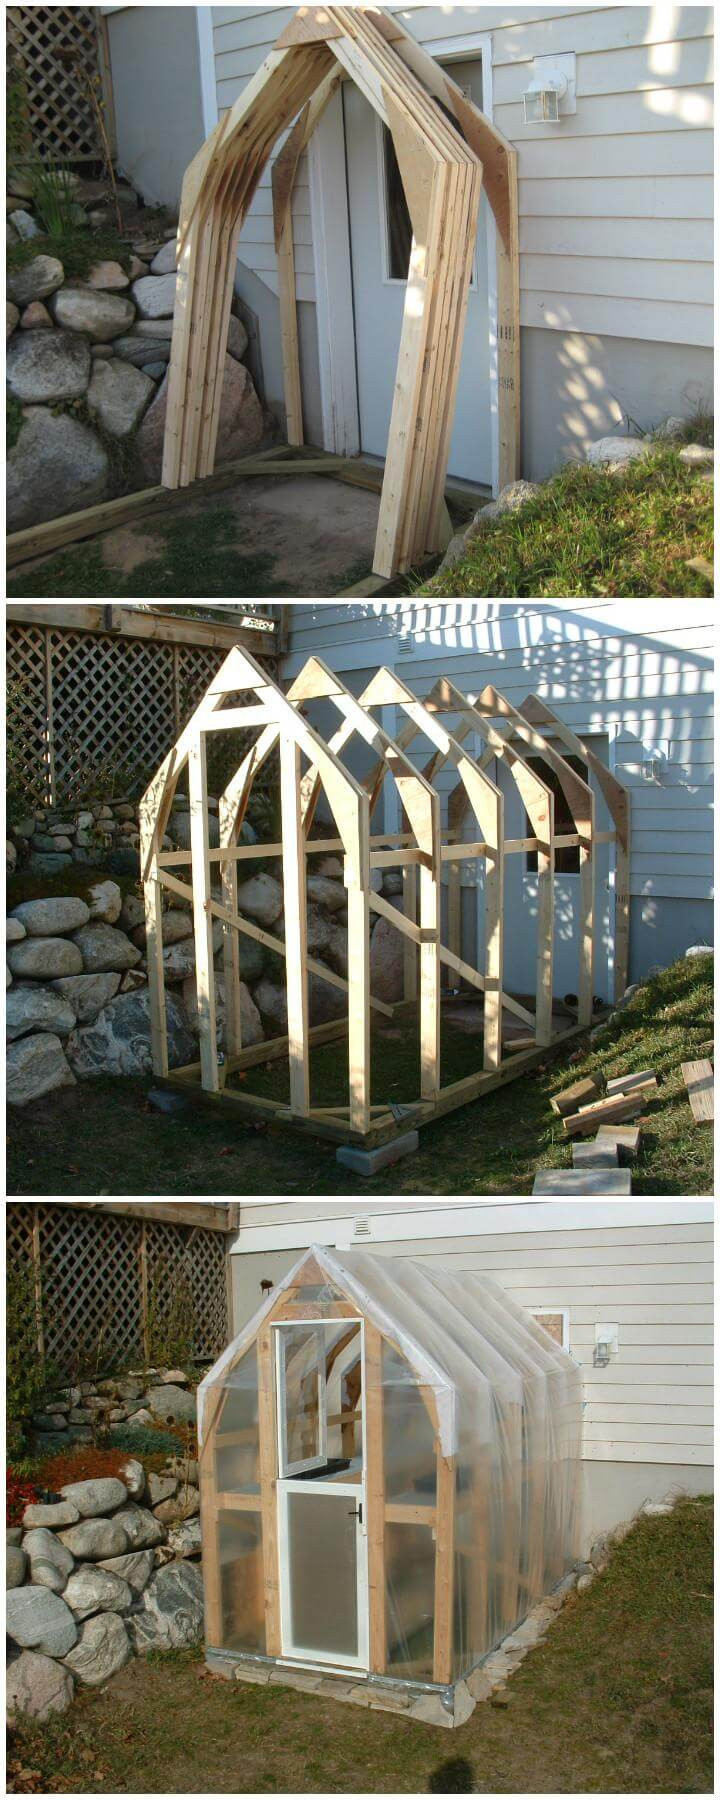 DIY Wooden Greenhouse
 80 DIY Greenhouse Ideas with Step by Step Tutorials